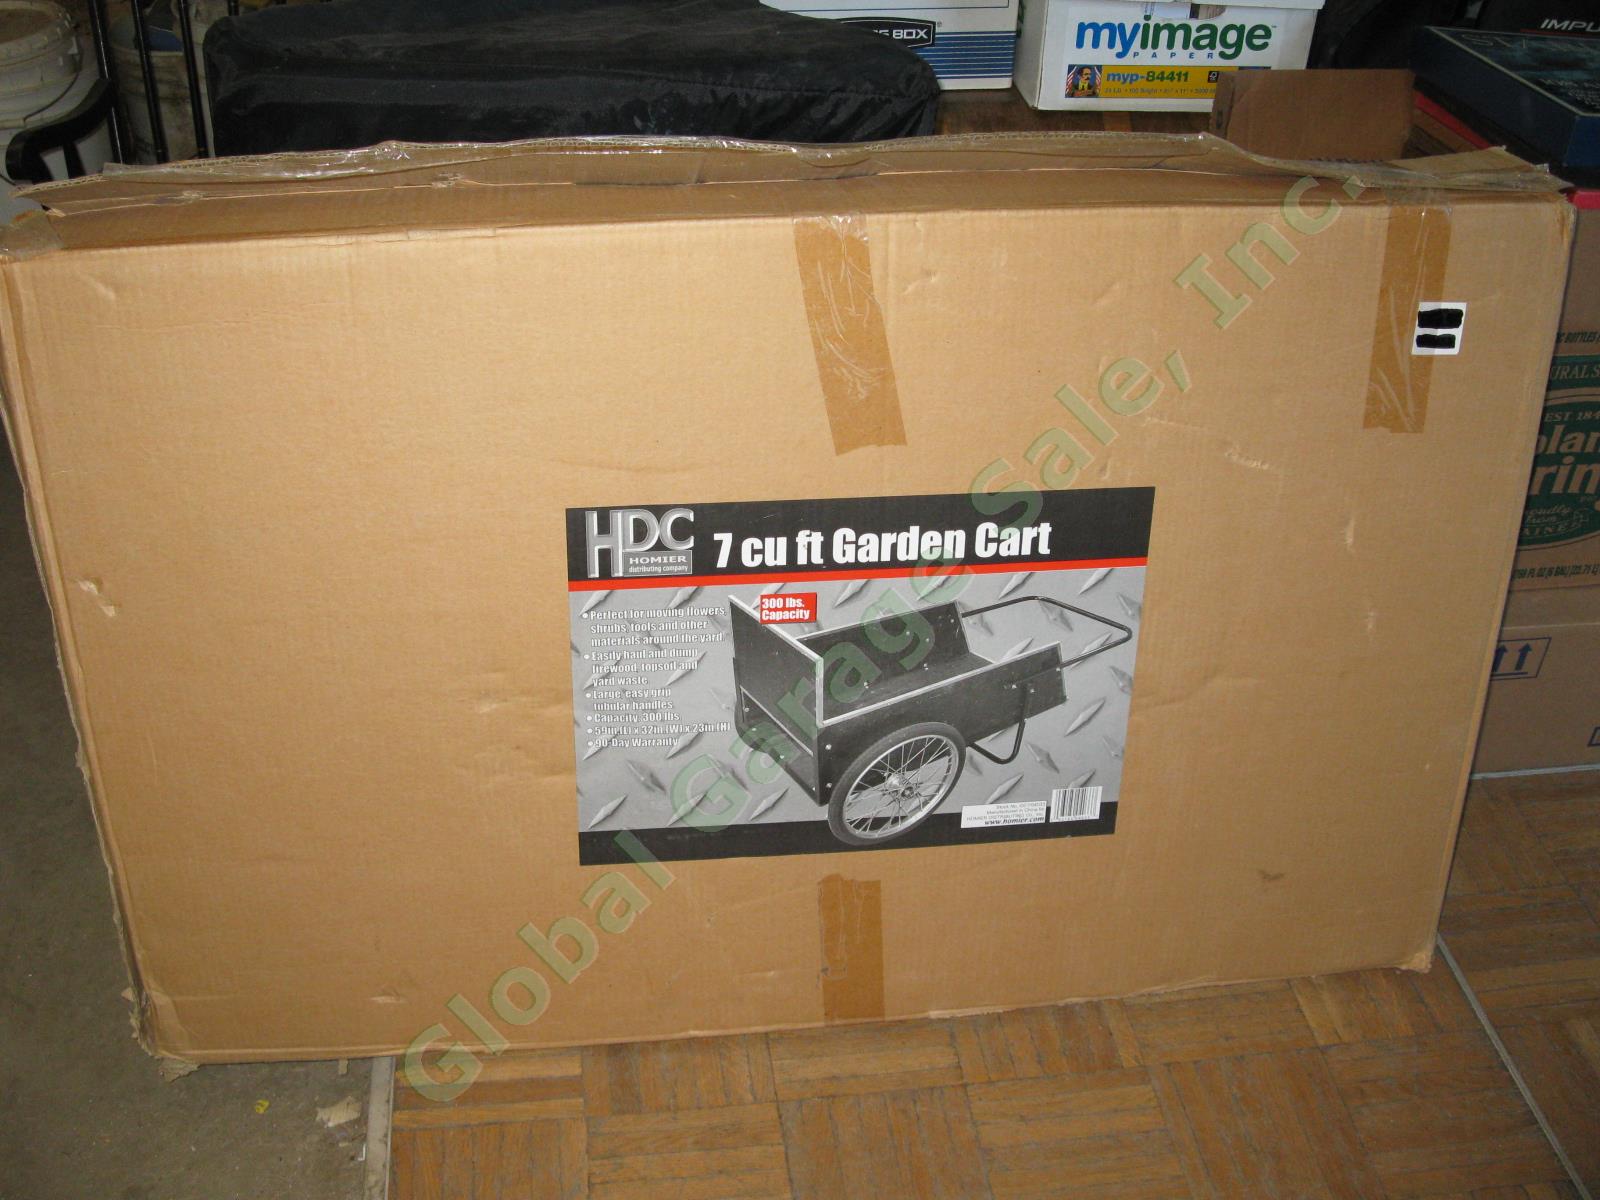 NEW IN BOX Homier HDC 7 Cubic Foot Garden Landscape Cart 300 Pound Capacity